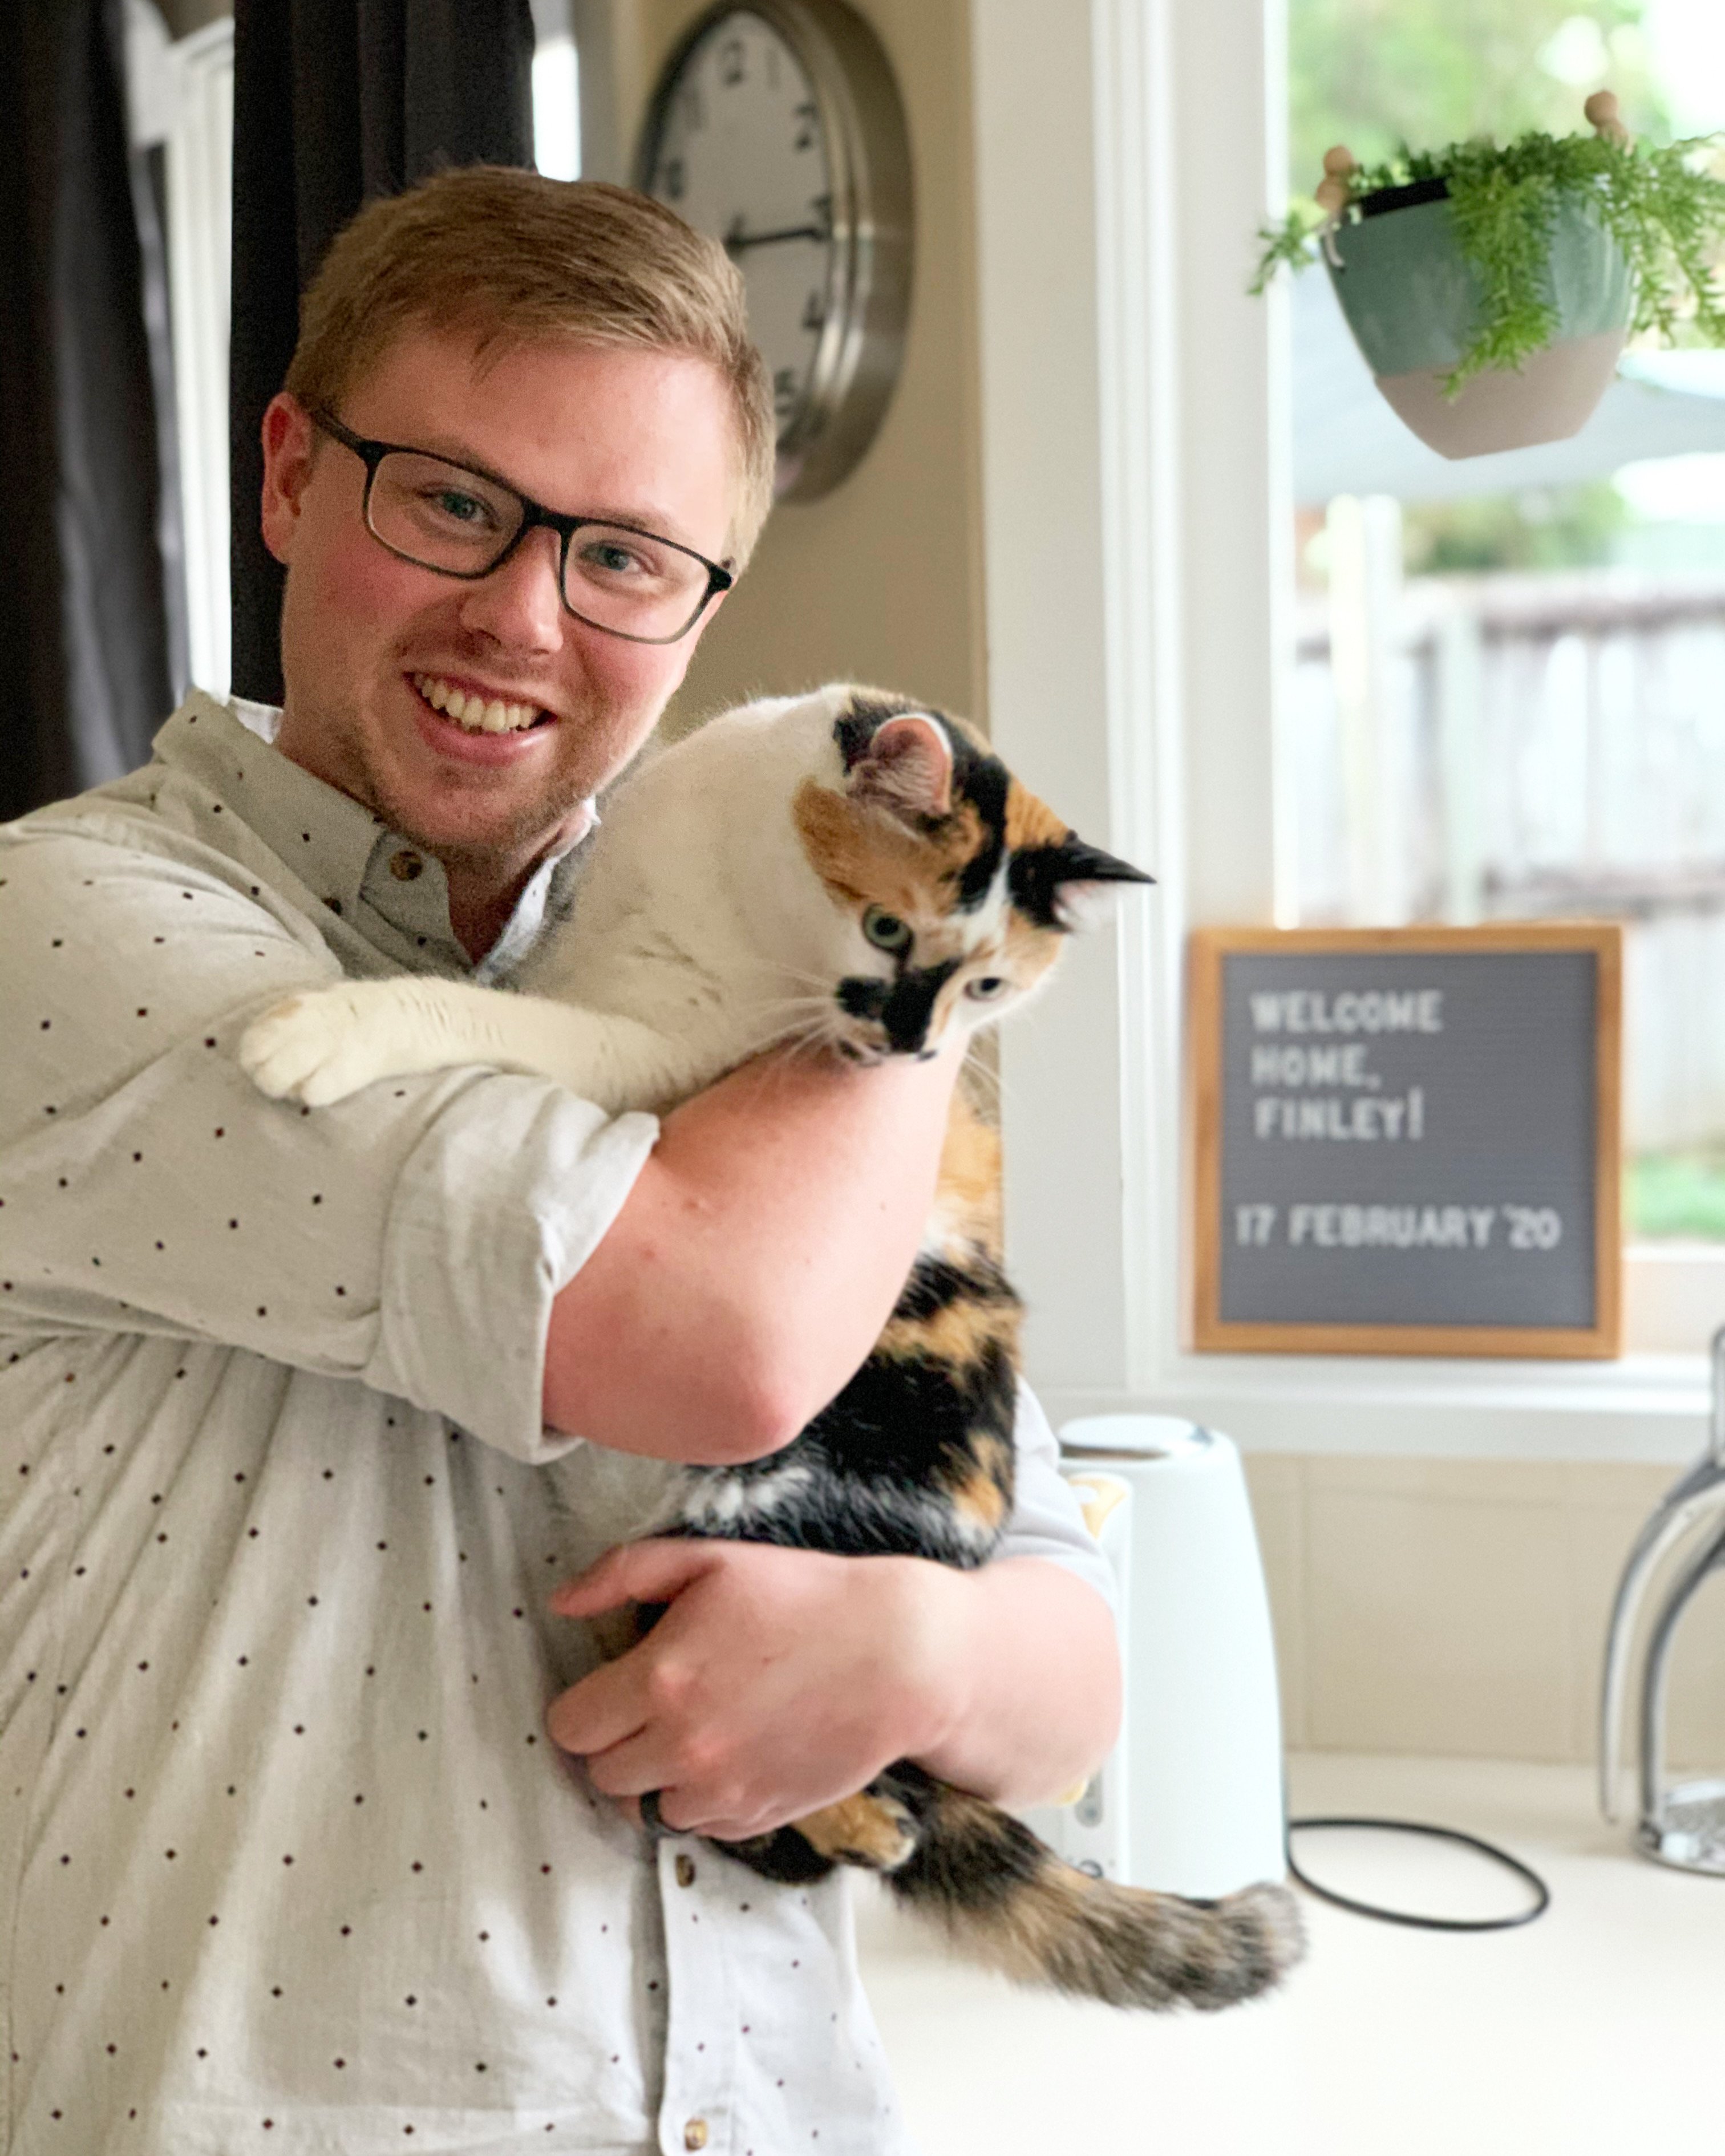 Finley the cat moved to Australia pictured with her dad after quarantine